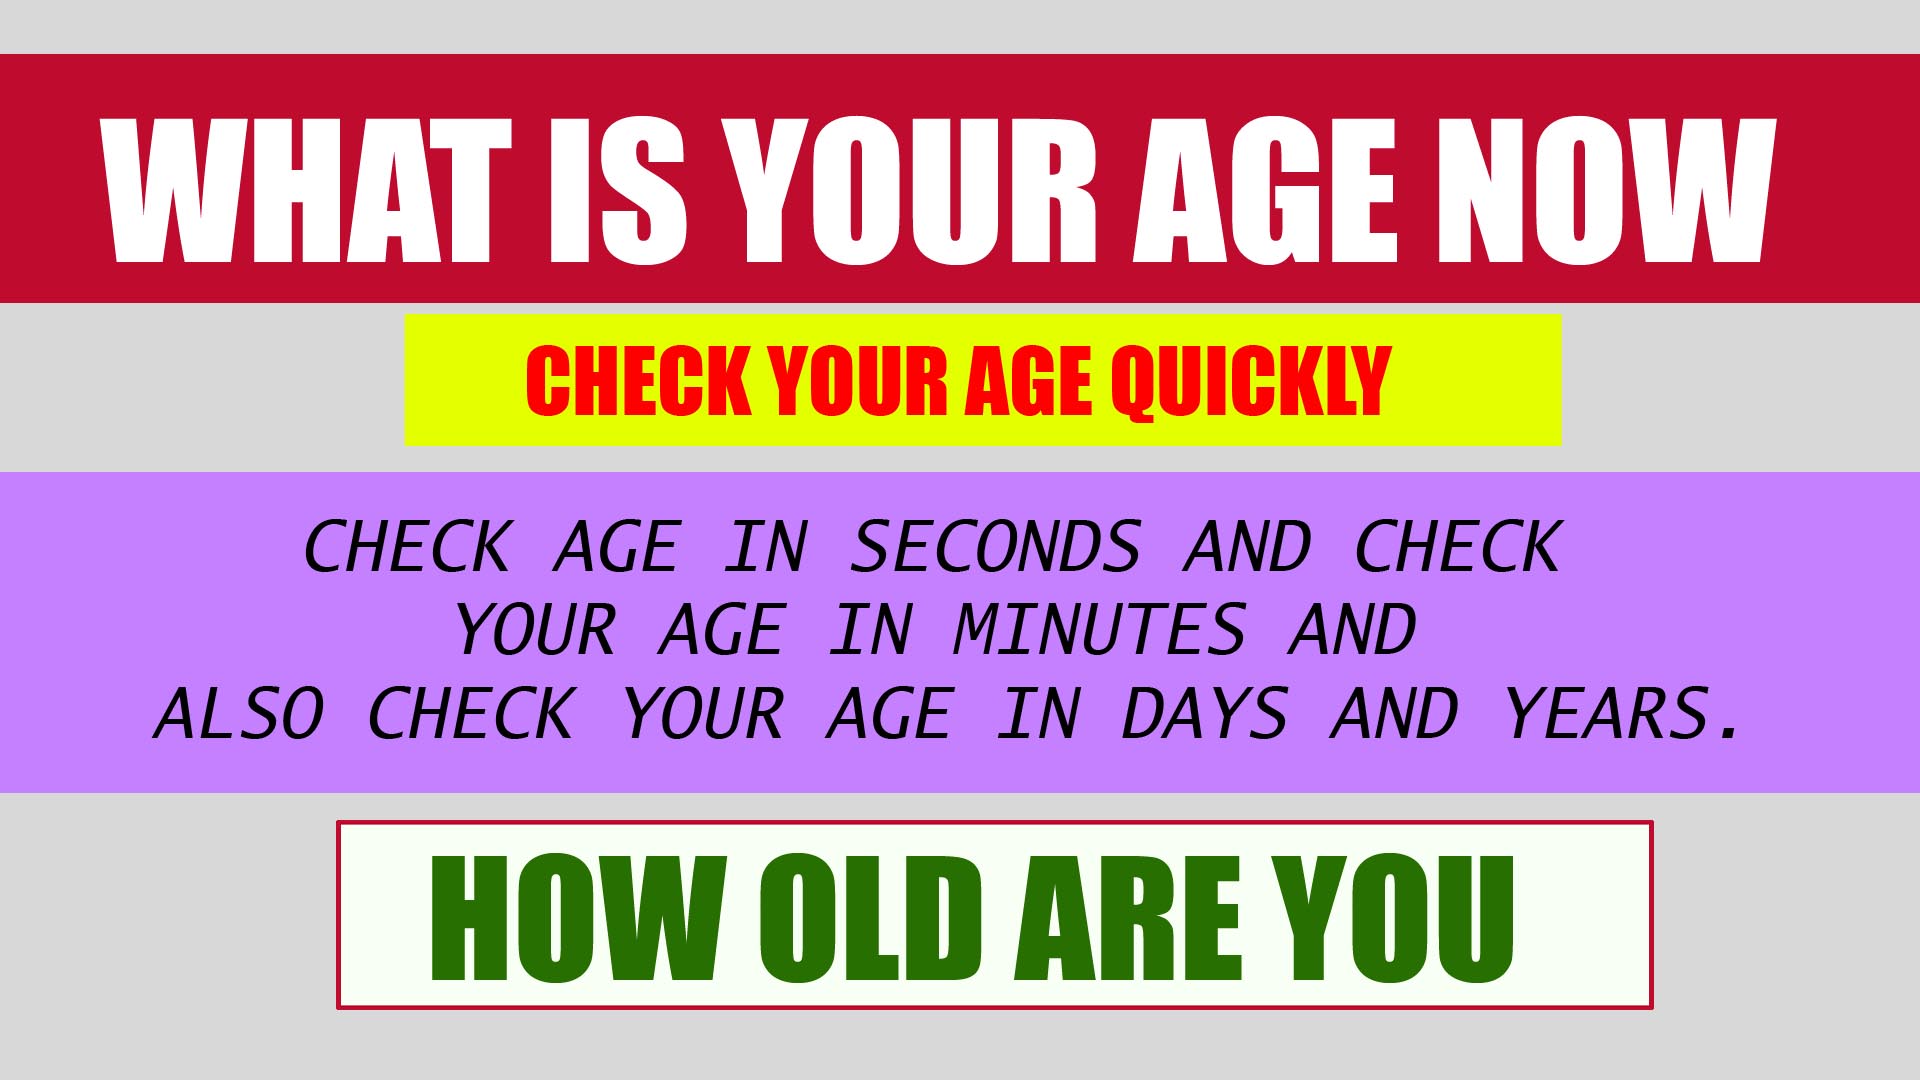 Check your age online